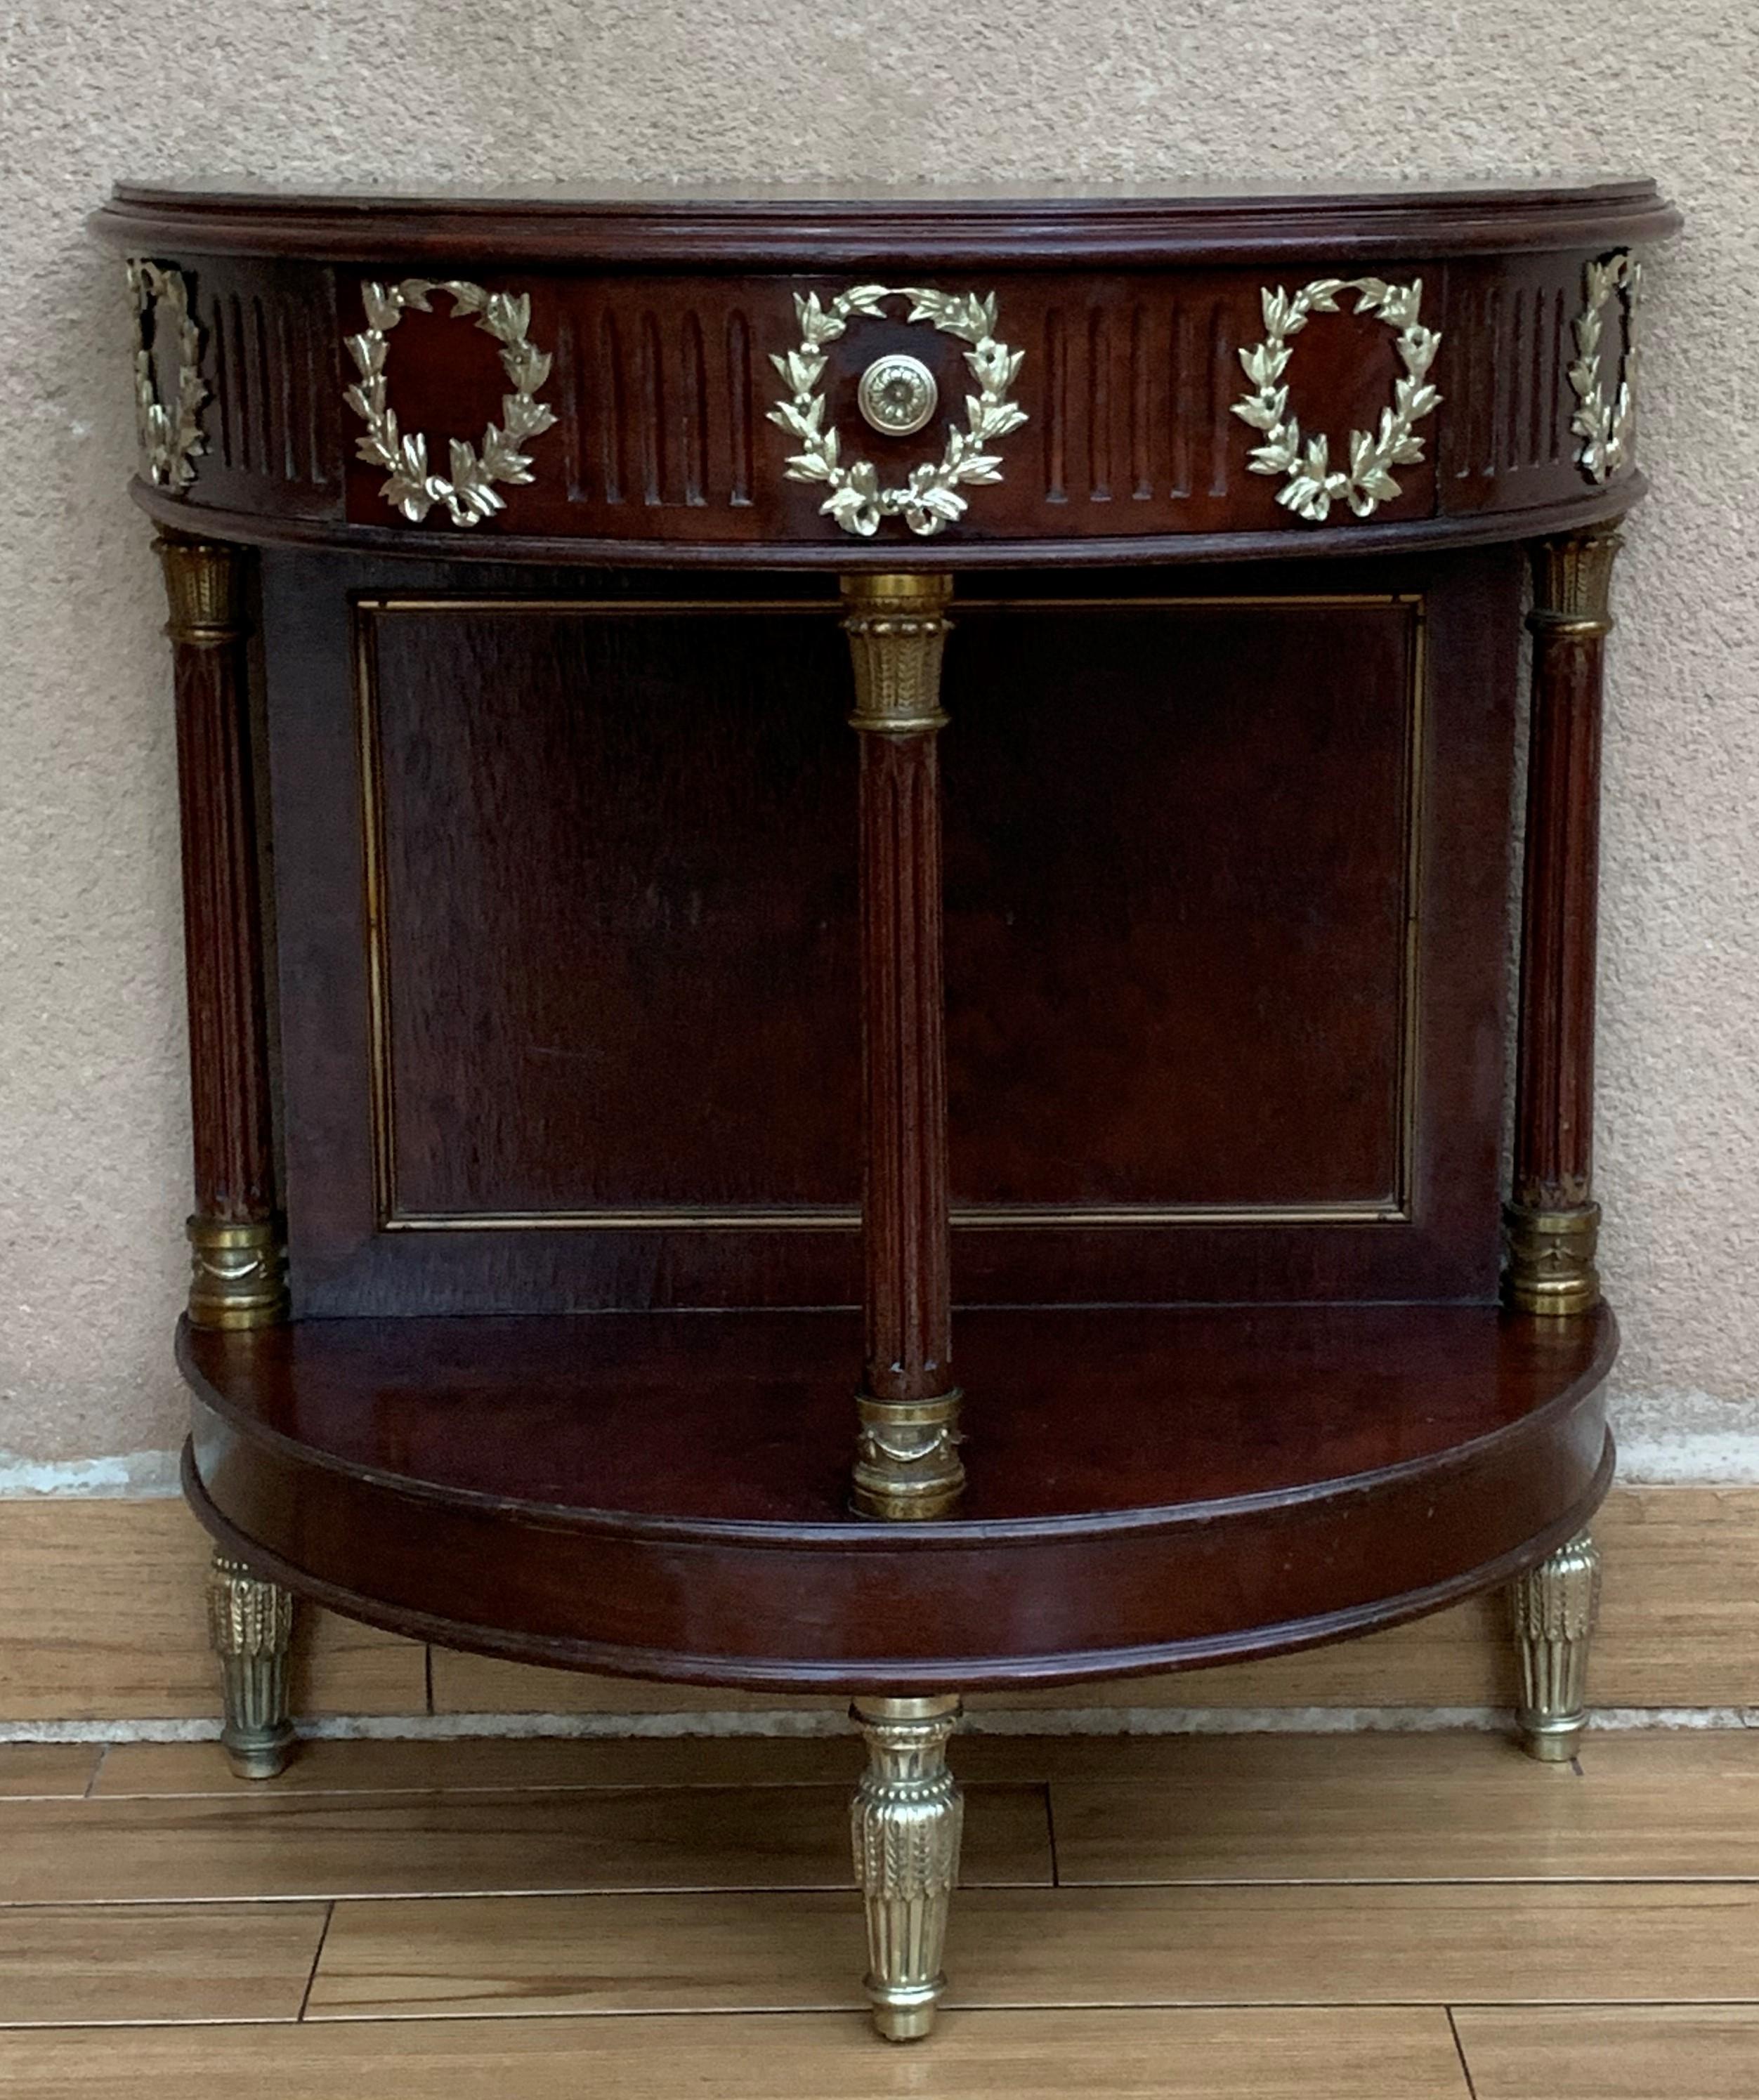 We are pleased to offer this pair of nightstands, circa 1900.
The tables are made of mahogany with a beautiful mounts of bronze in drawers and columns.
The legs are made in solid bronze.